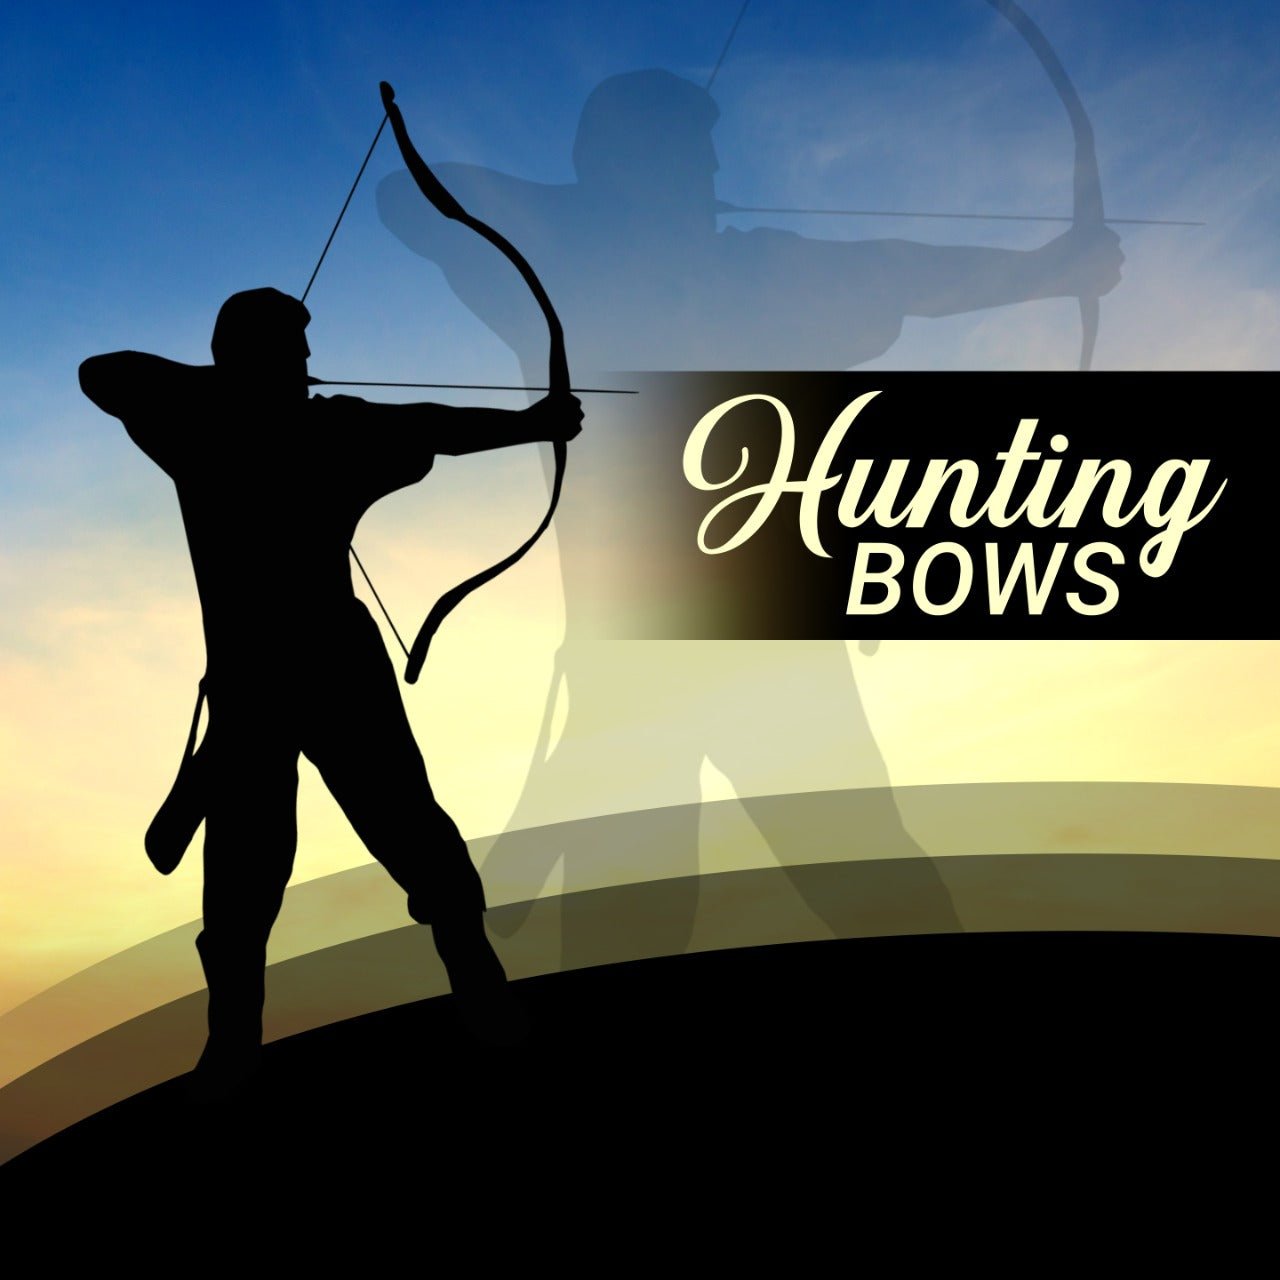 Are you Ready for the next Bow hunting Season?